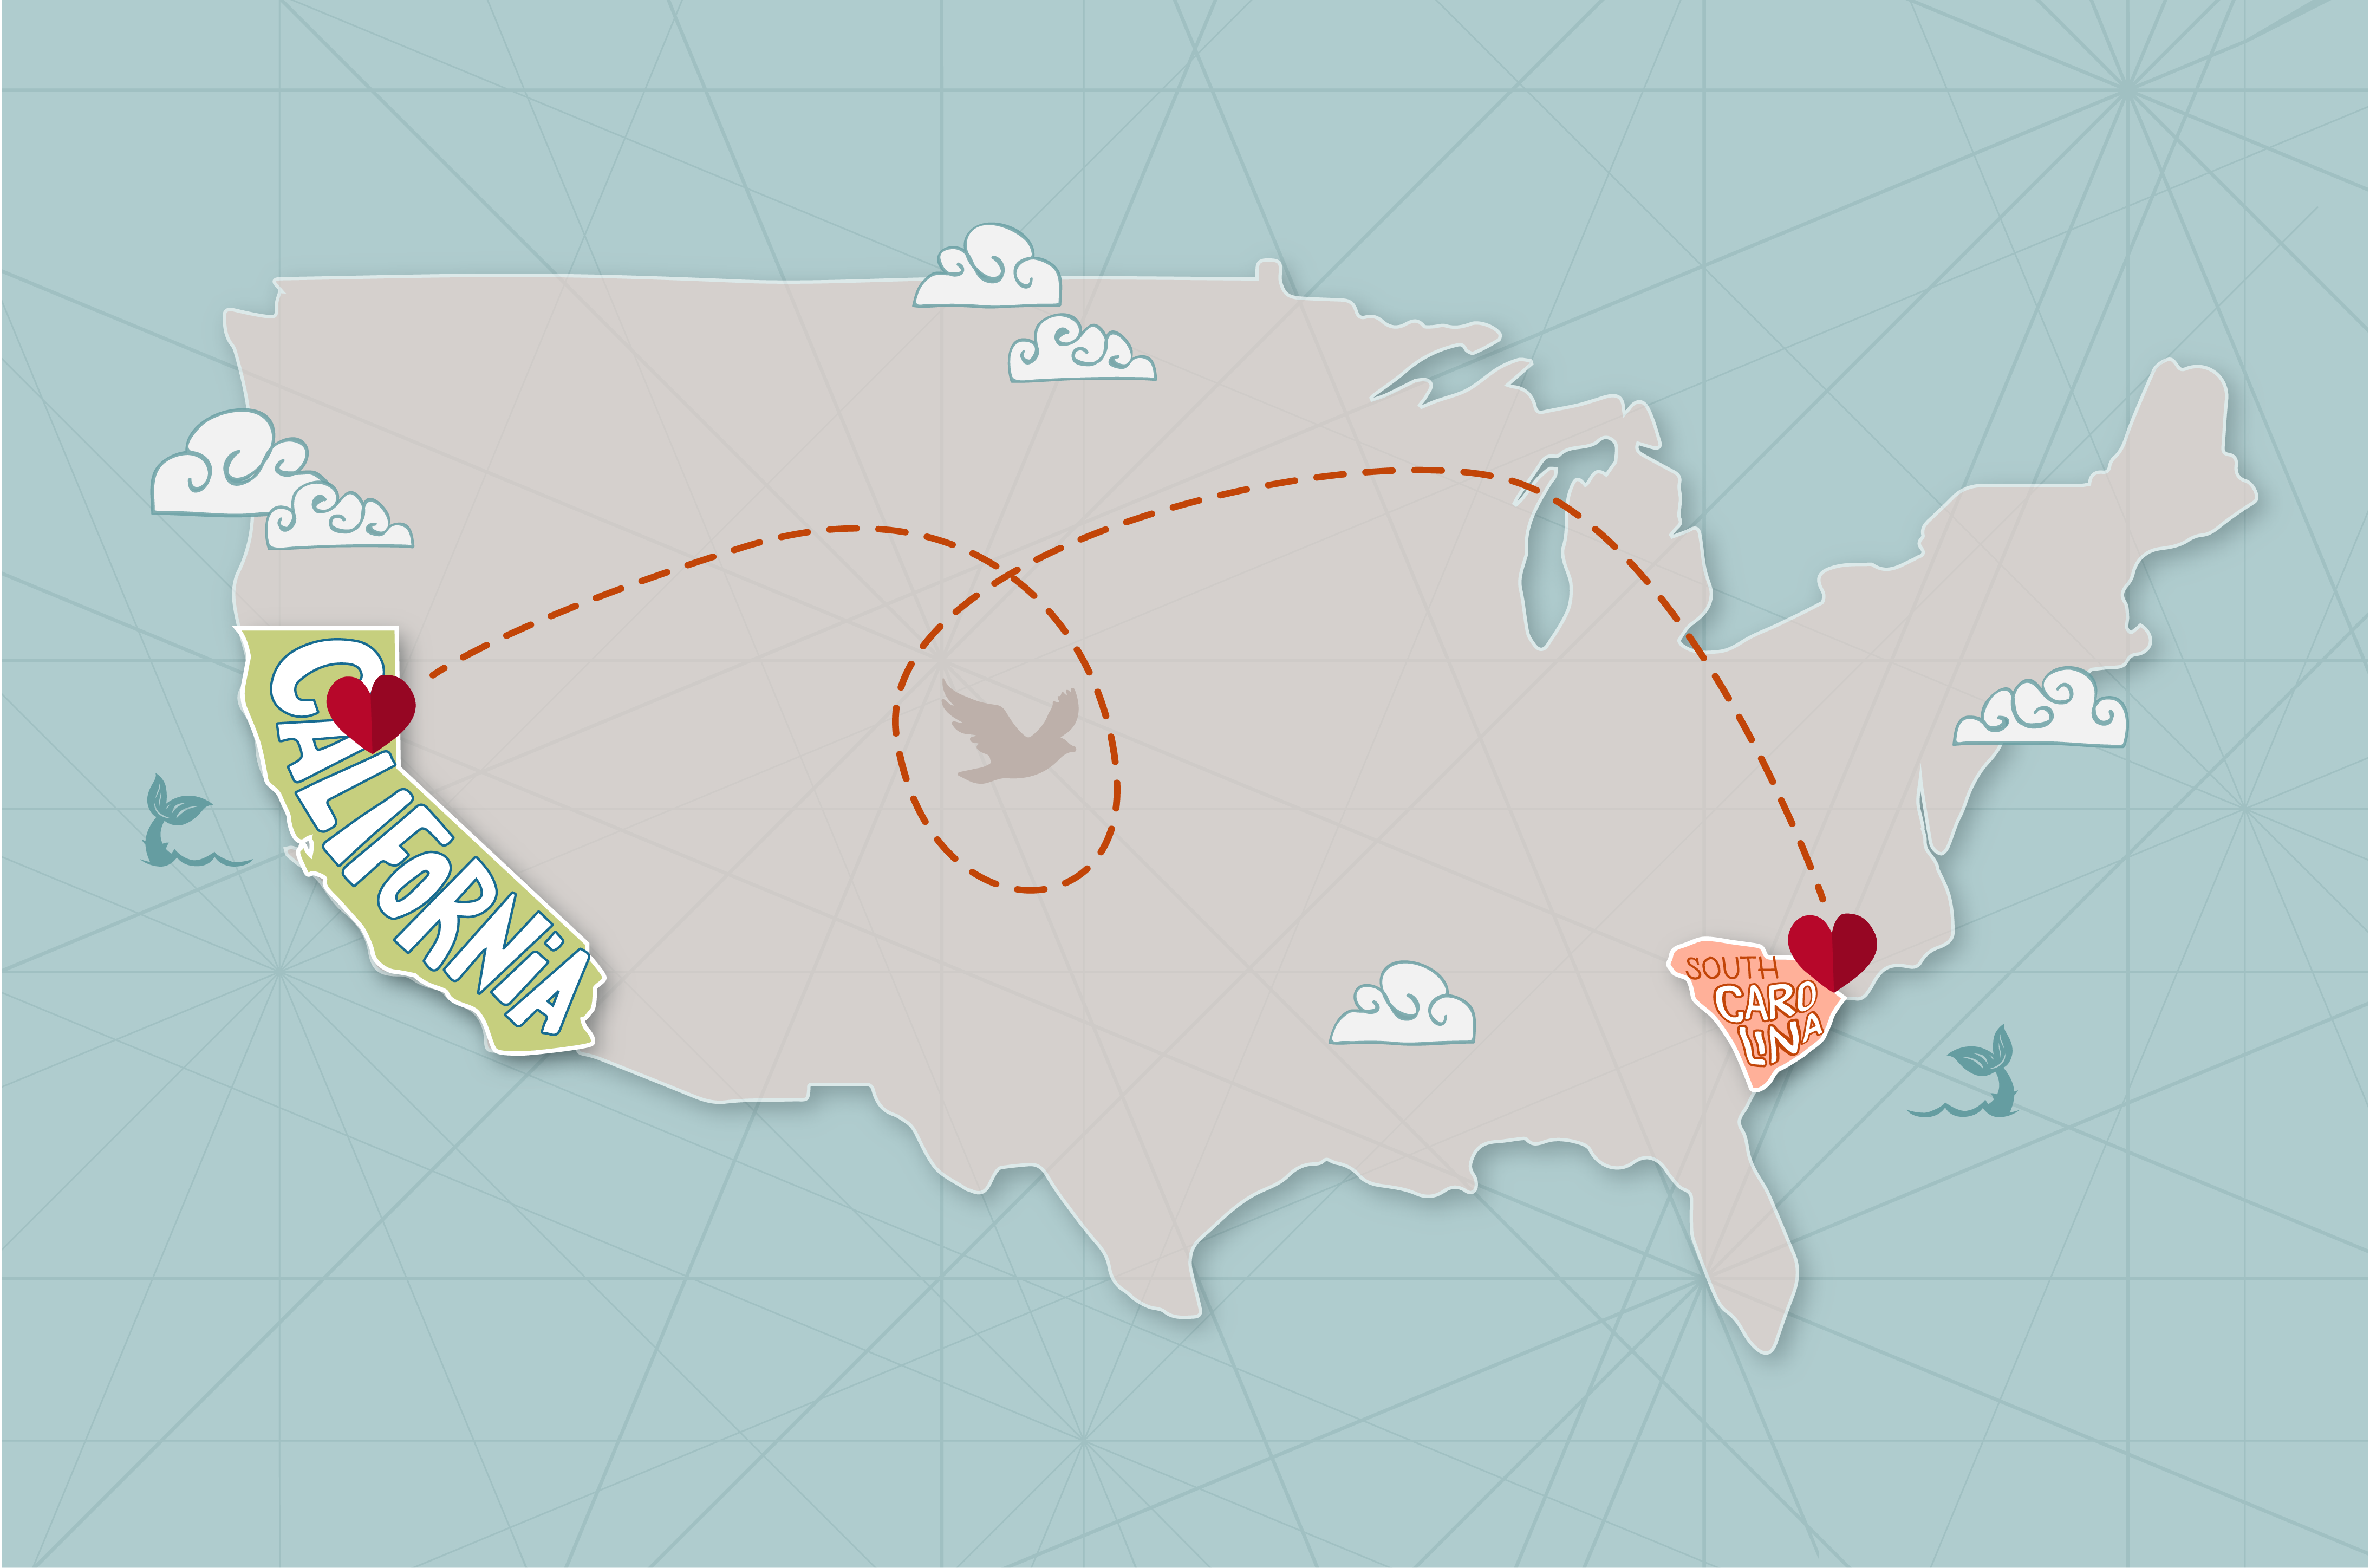 A map of the United States shows South Carolina and Chico connected by a heart in each state and a swirling dotted line between the two.